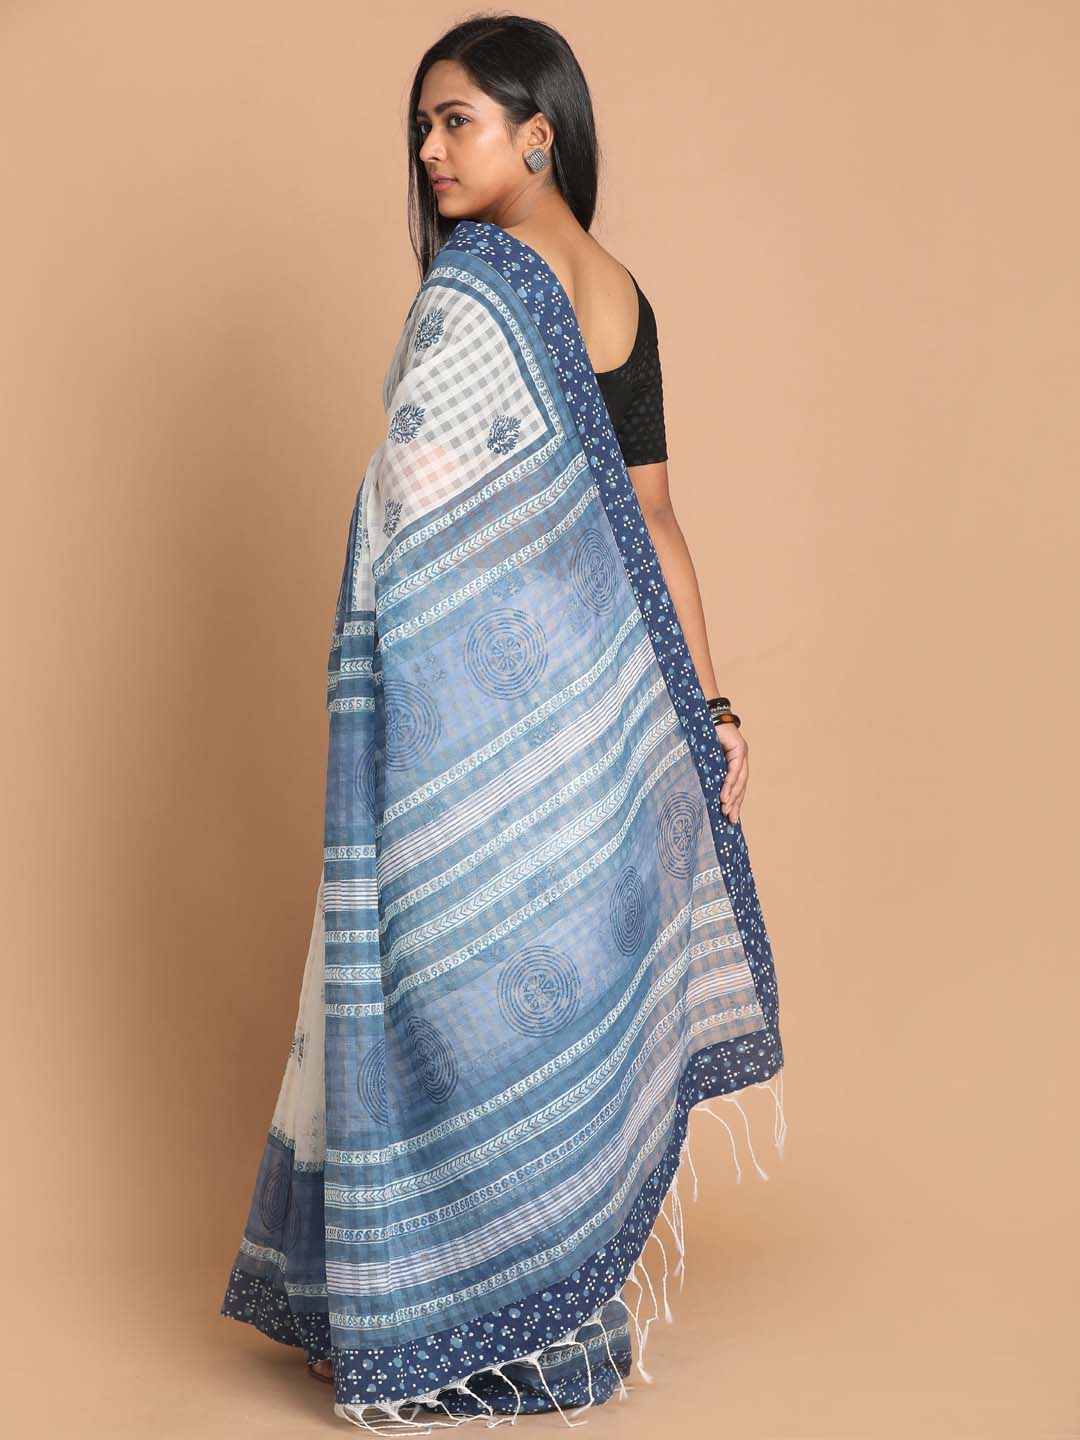 Indethnic Printed Cotton Blend Saree in blue - View 3